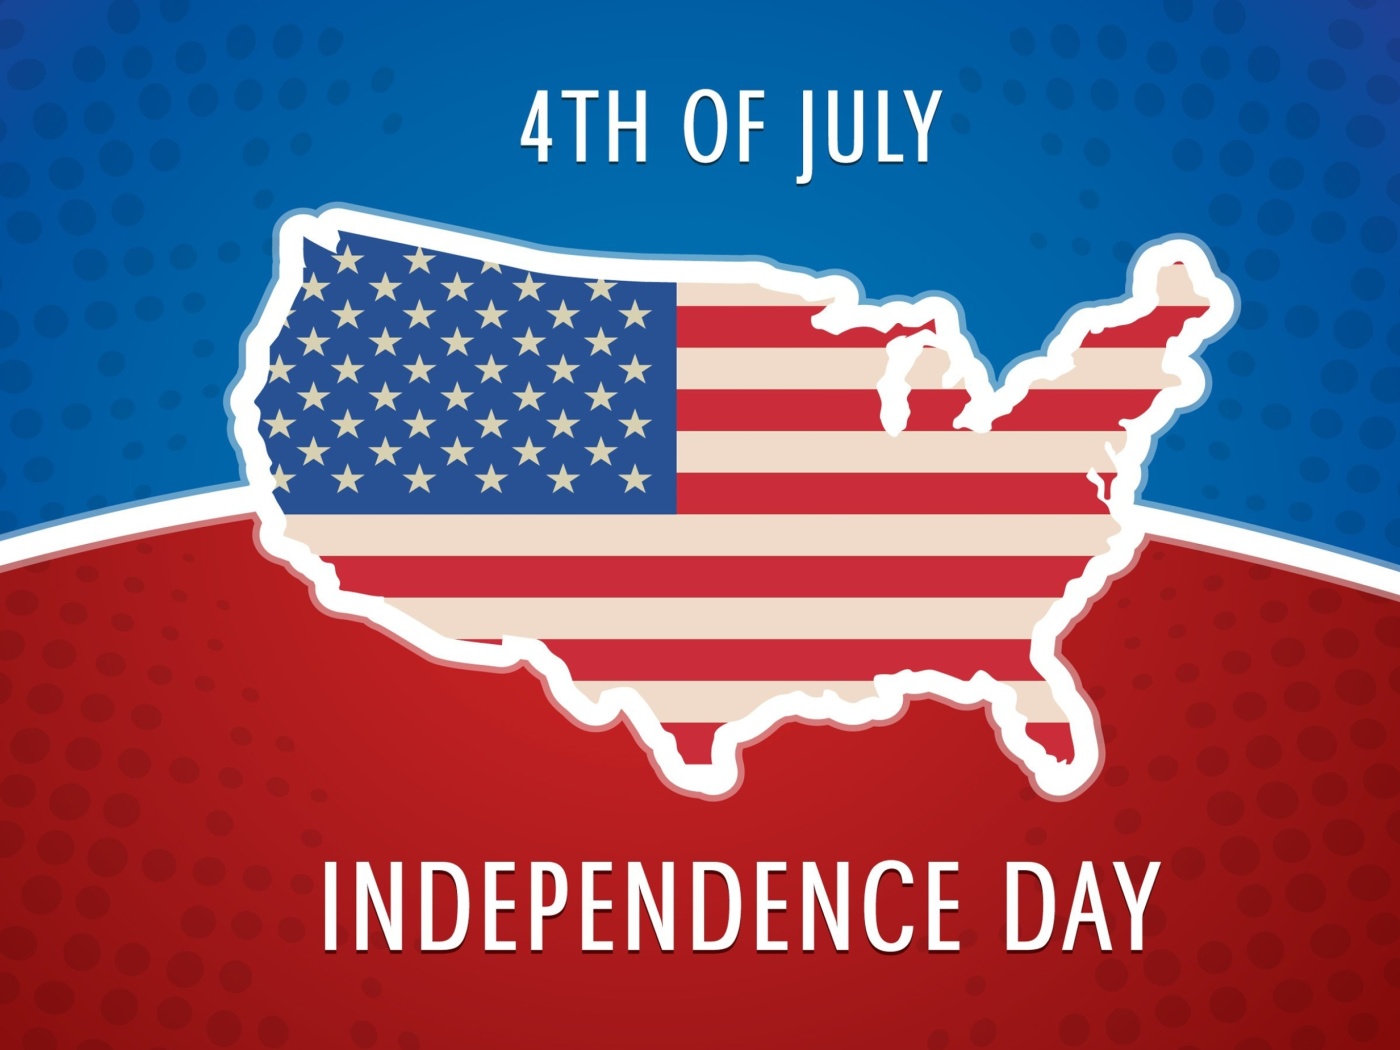 4th of July, Independence Day wallpaper 1400x1050